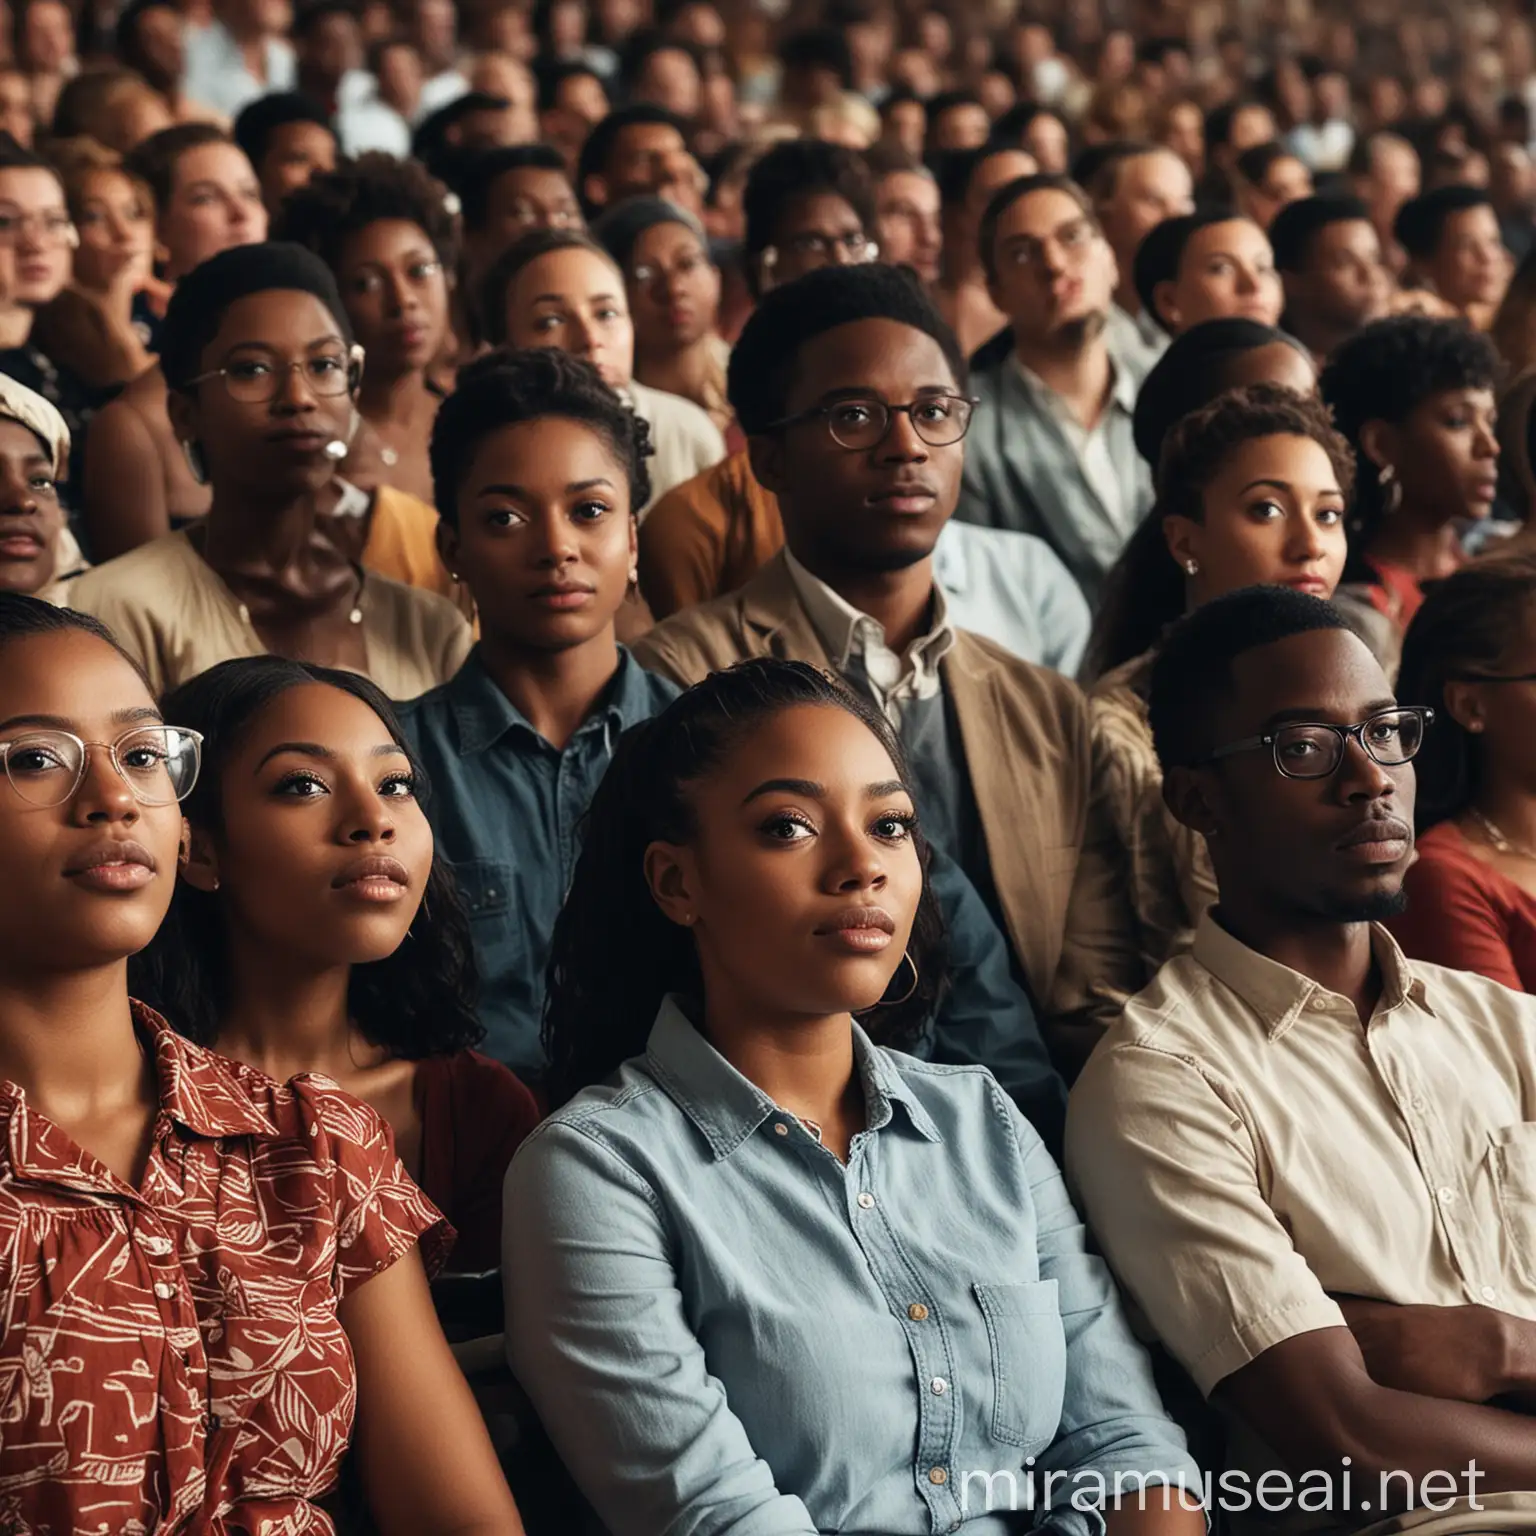 Diverse Audience of Black People Enjoying a Live Performance